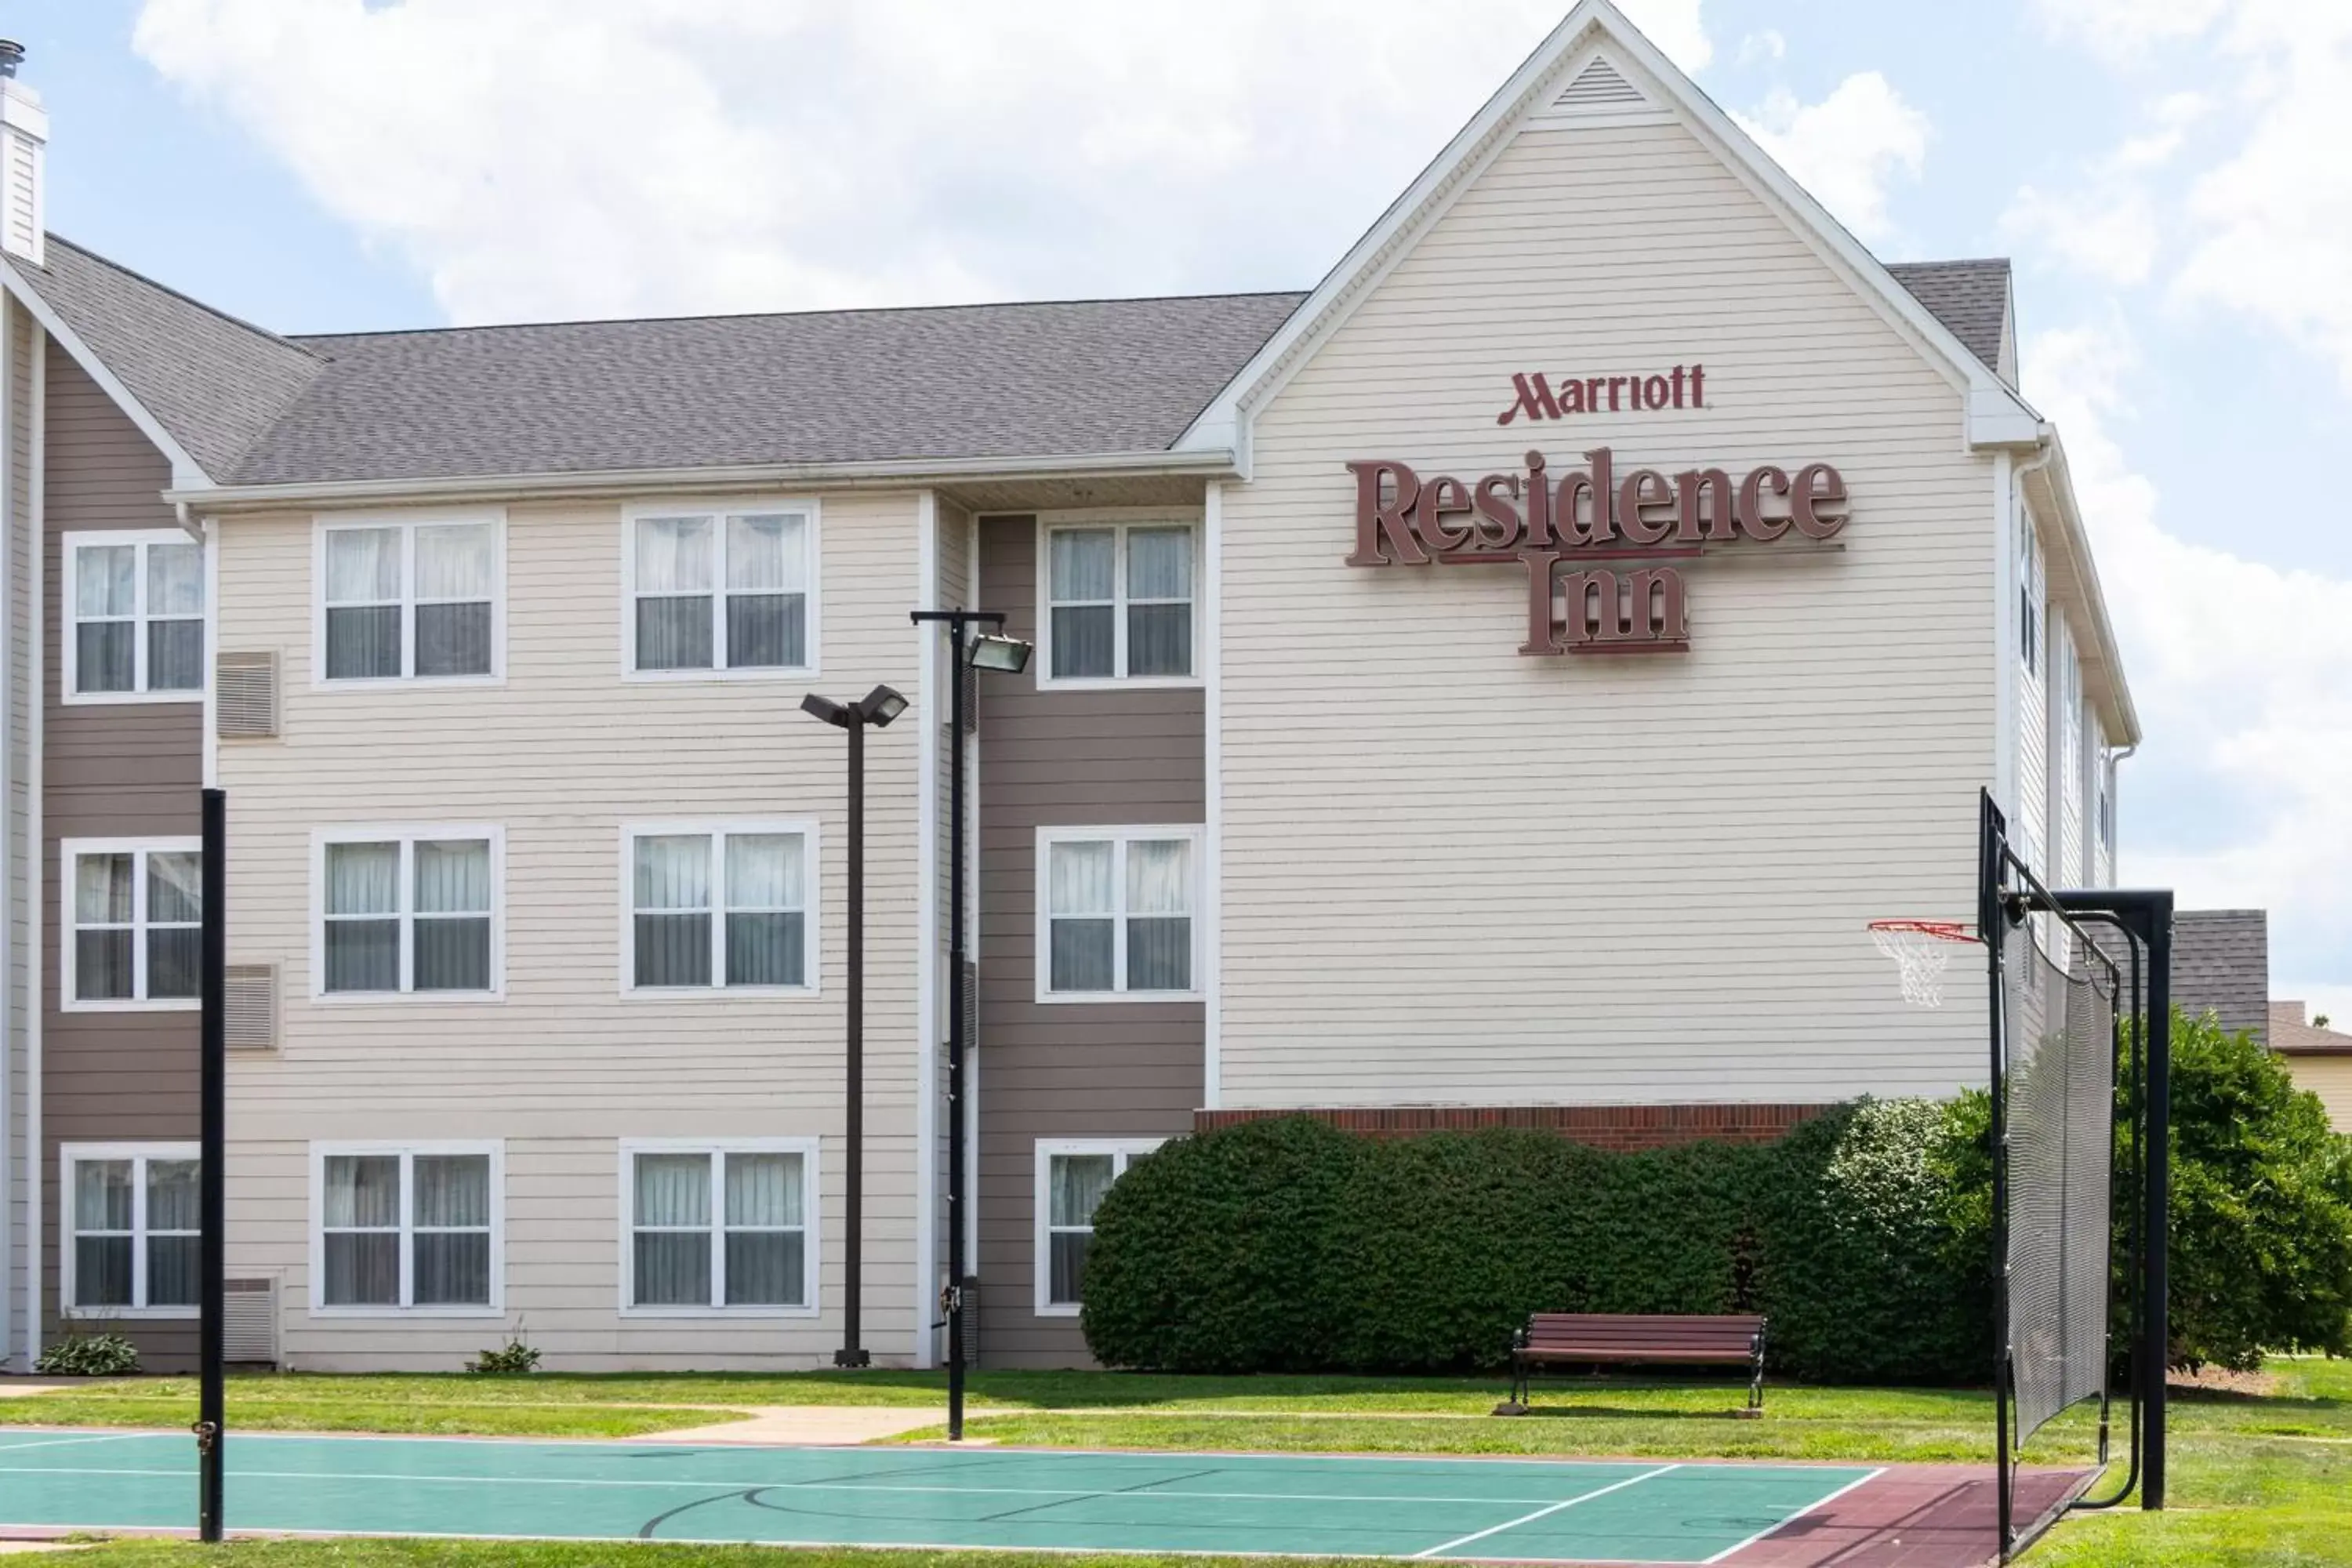 Area and facilities, Property Building in Residence Inn by Marriott Evansville East